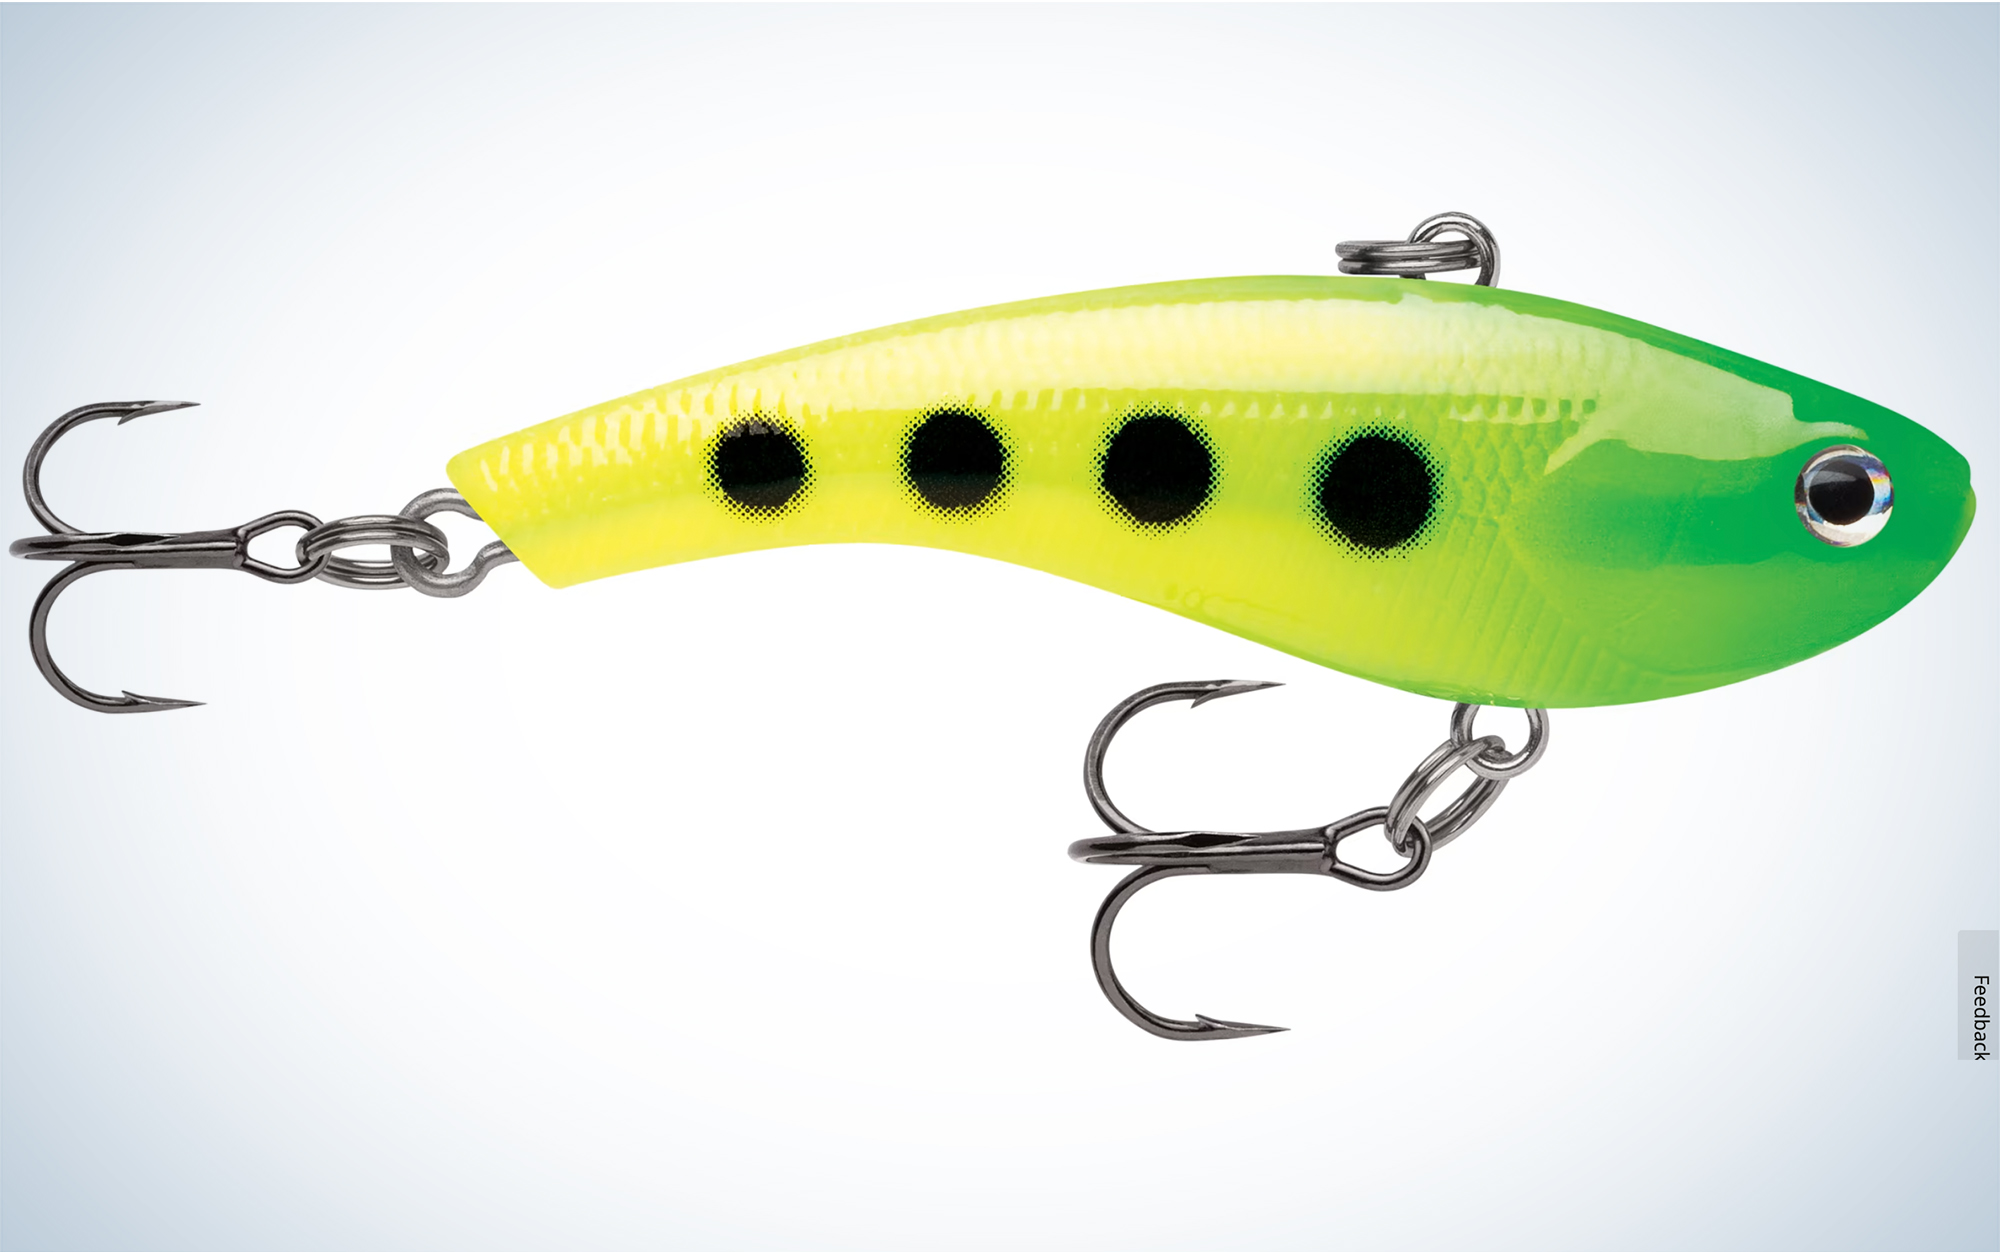 The Rapala Slab Rap is one of the best walleye ice fishing lures.